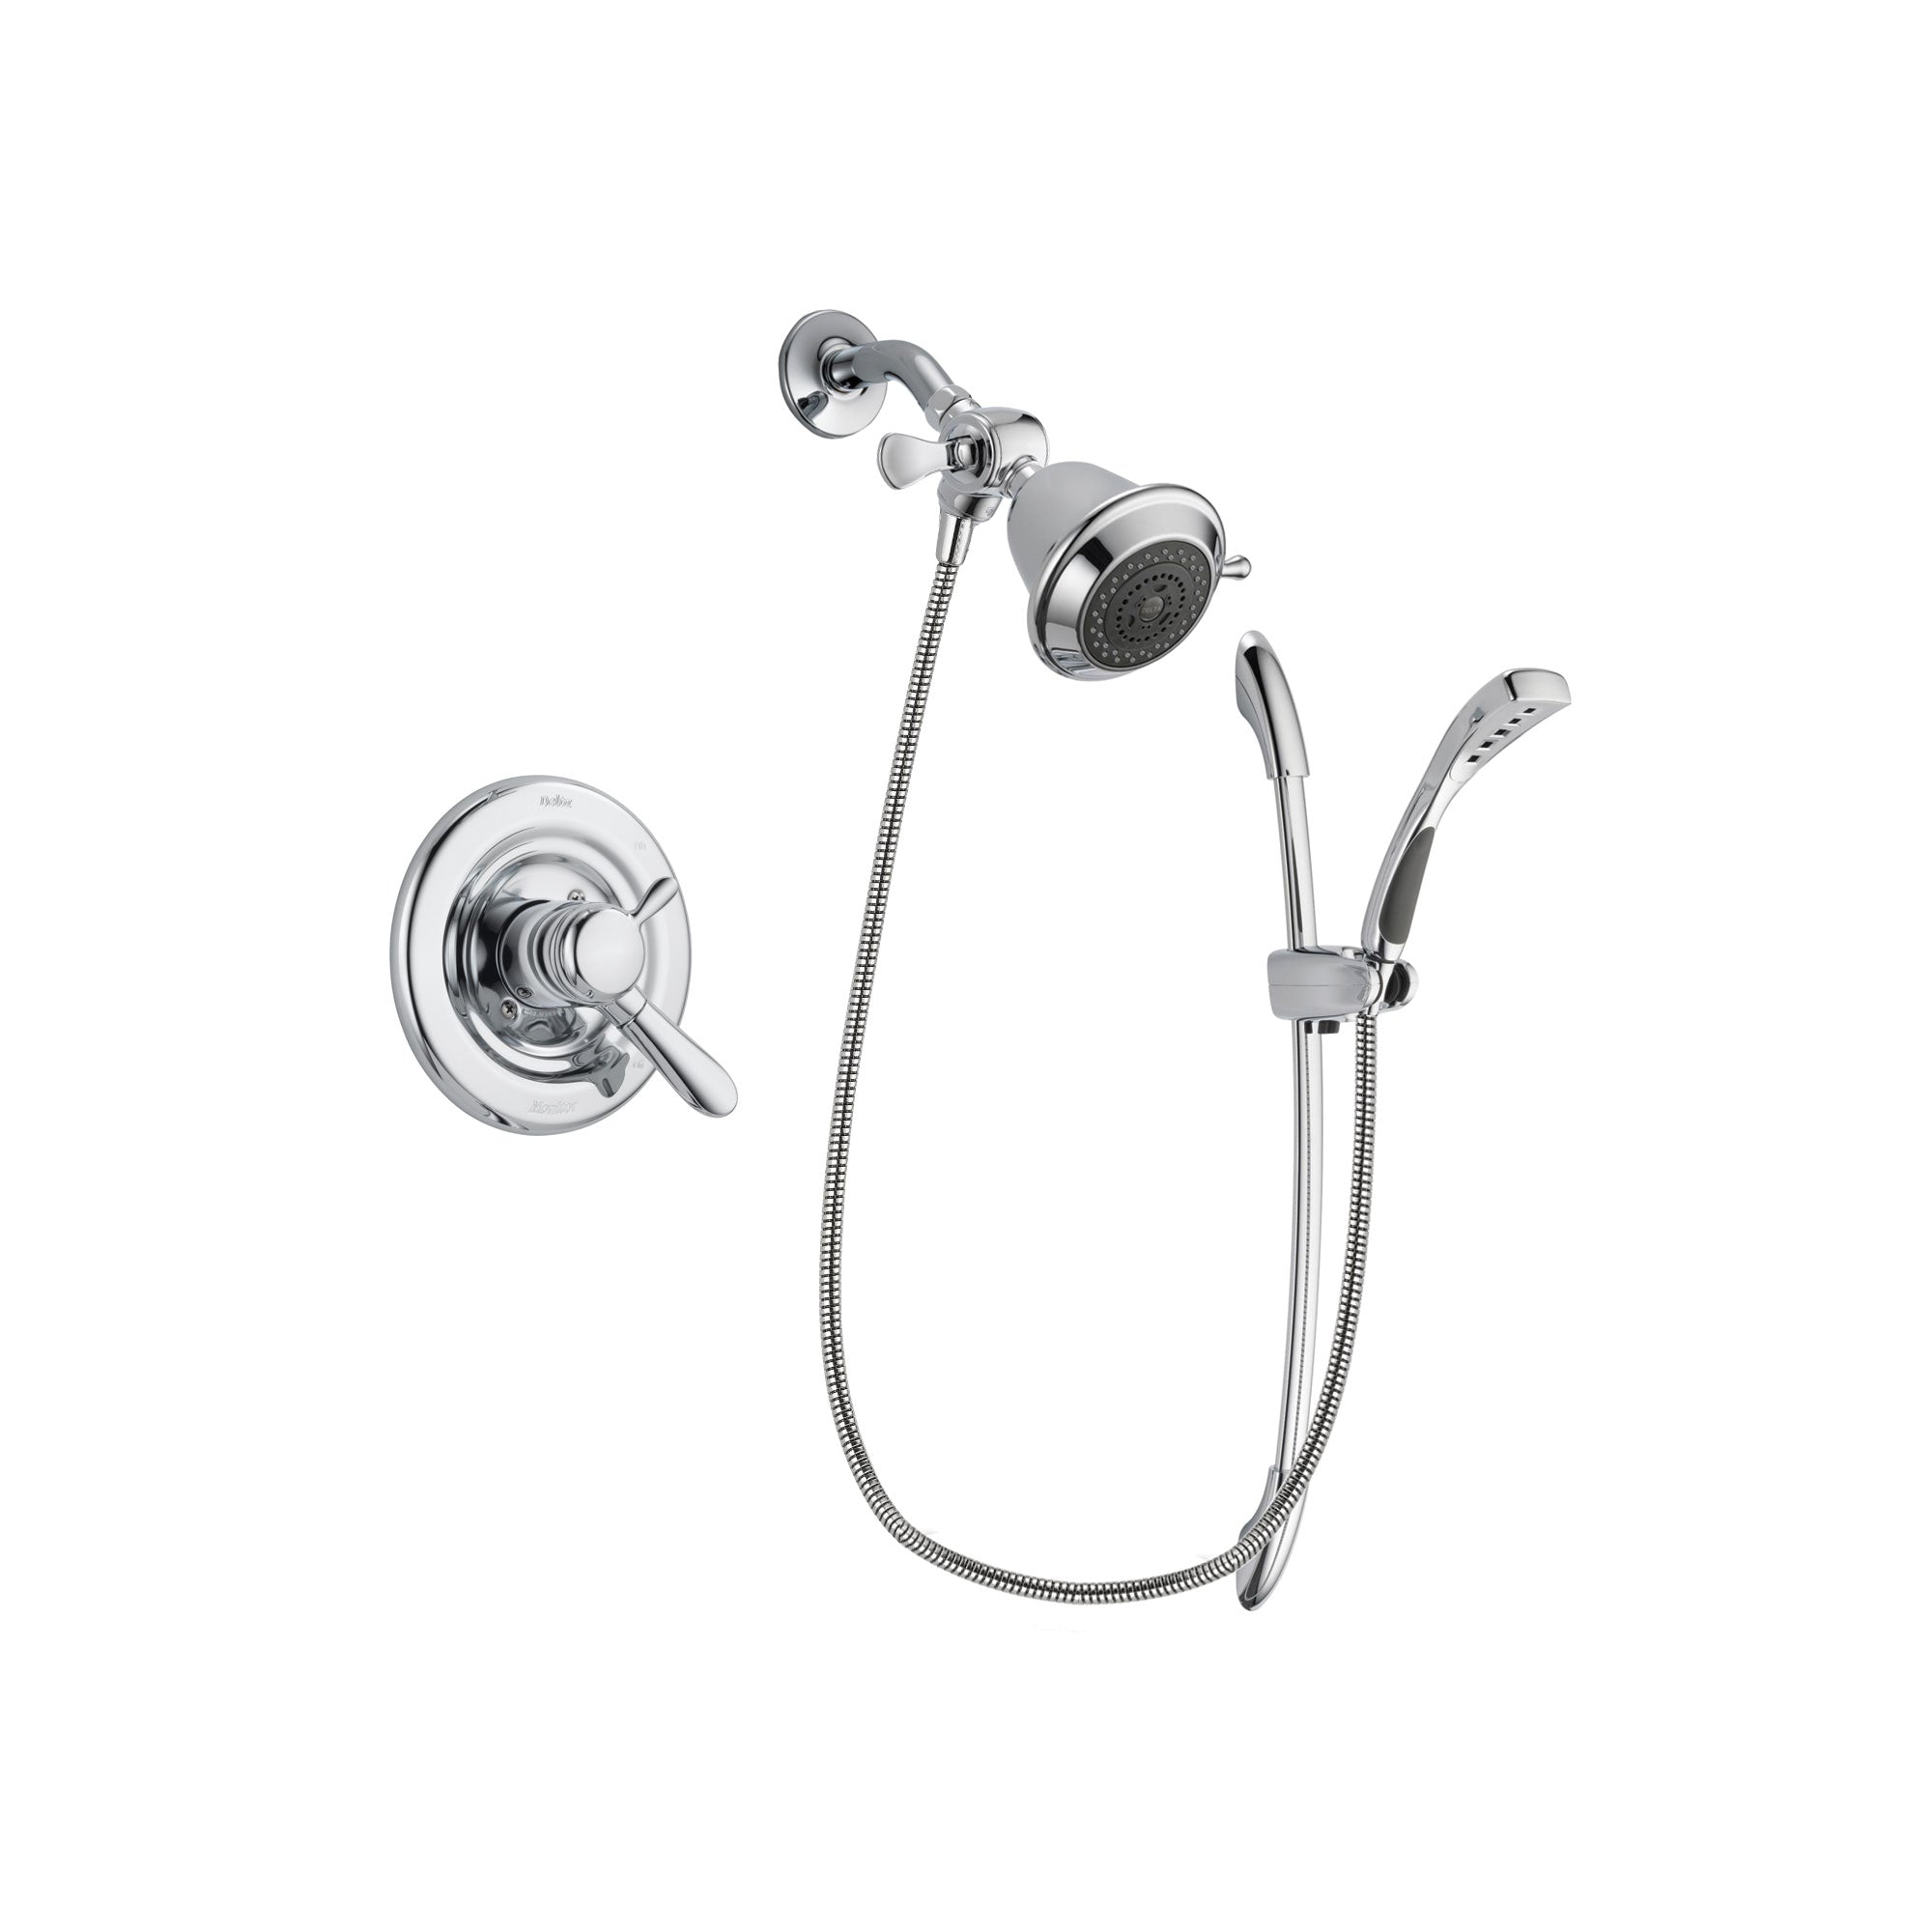 Delta Lahara Chrome Finish Dual Control Shower Faucet System Package with Shower Head and Handheld Shower with Slide Bar Includes Rough-in Valve DSP0446V